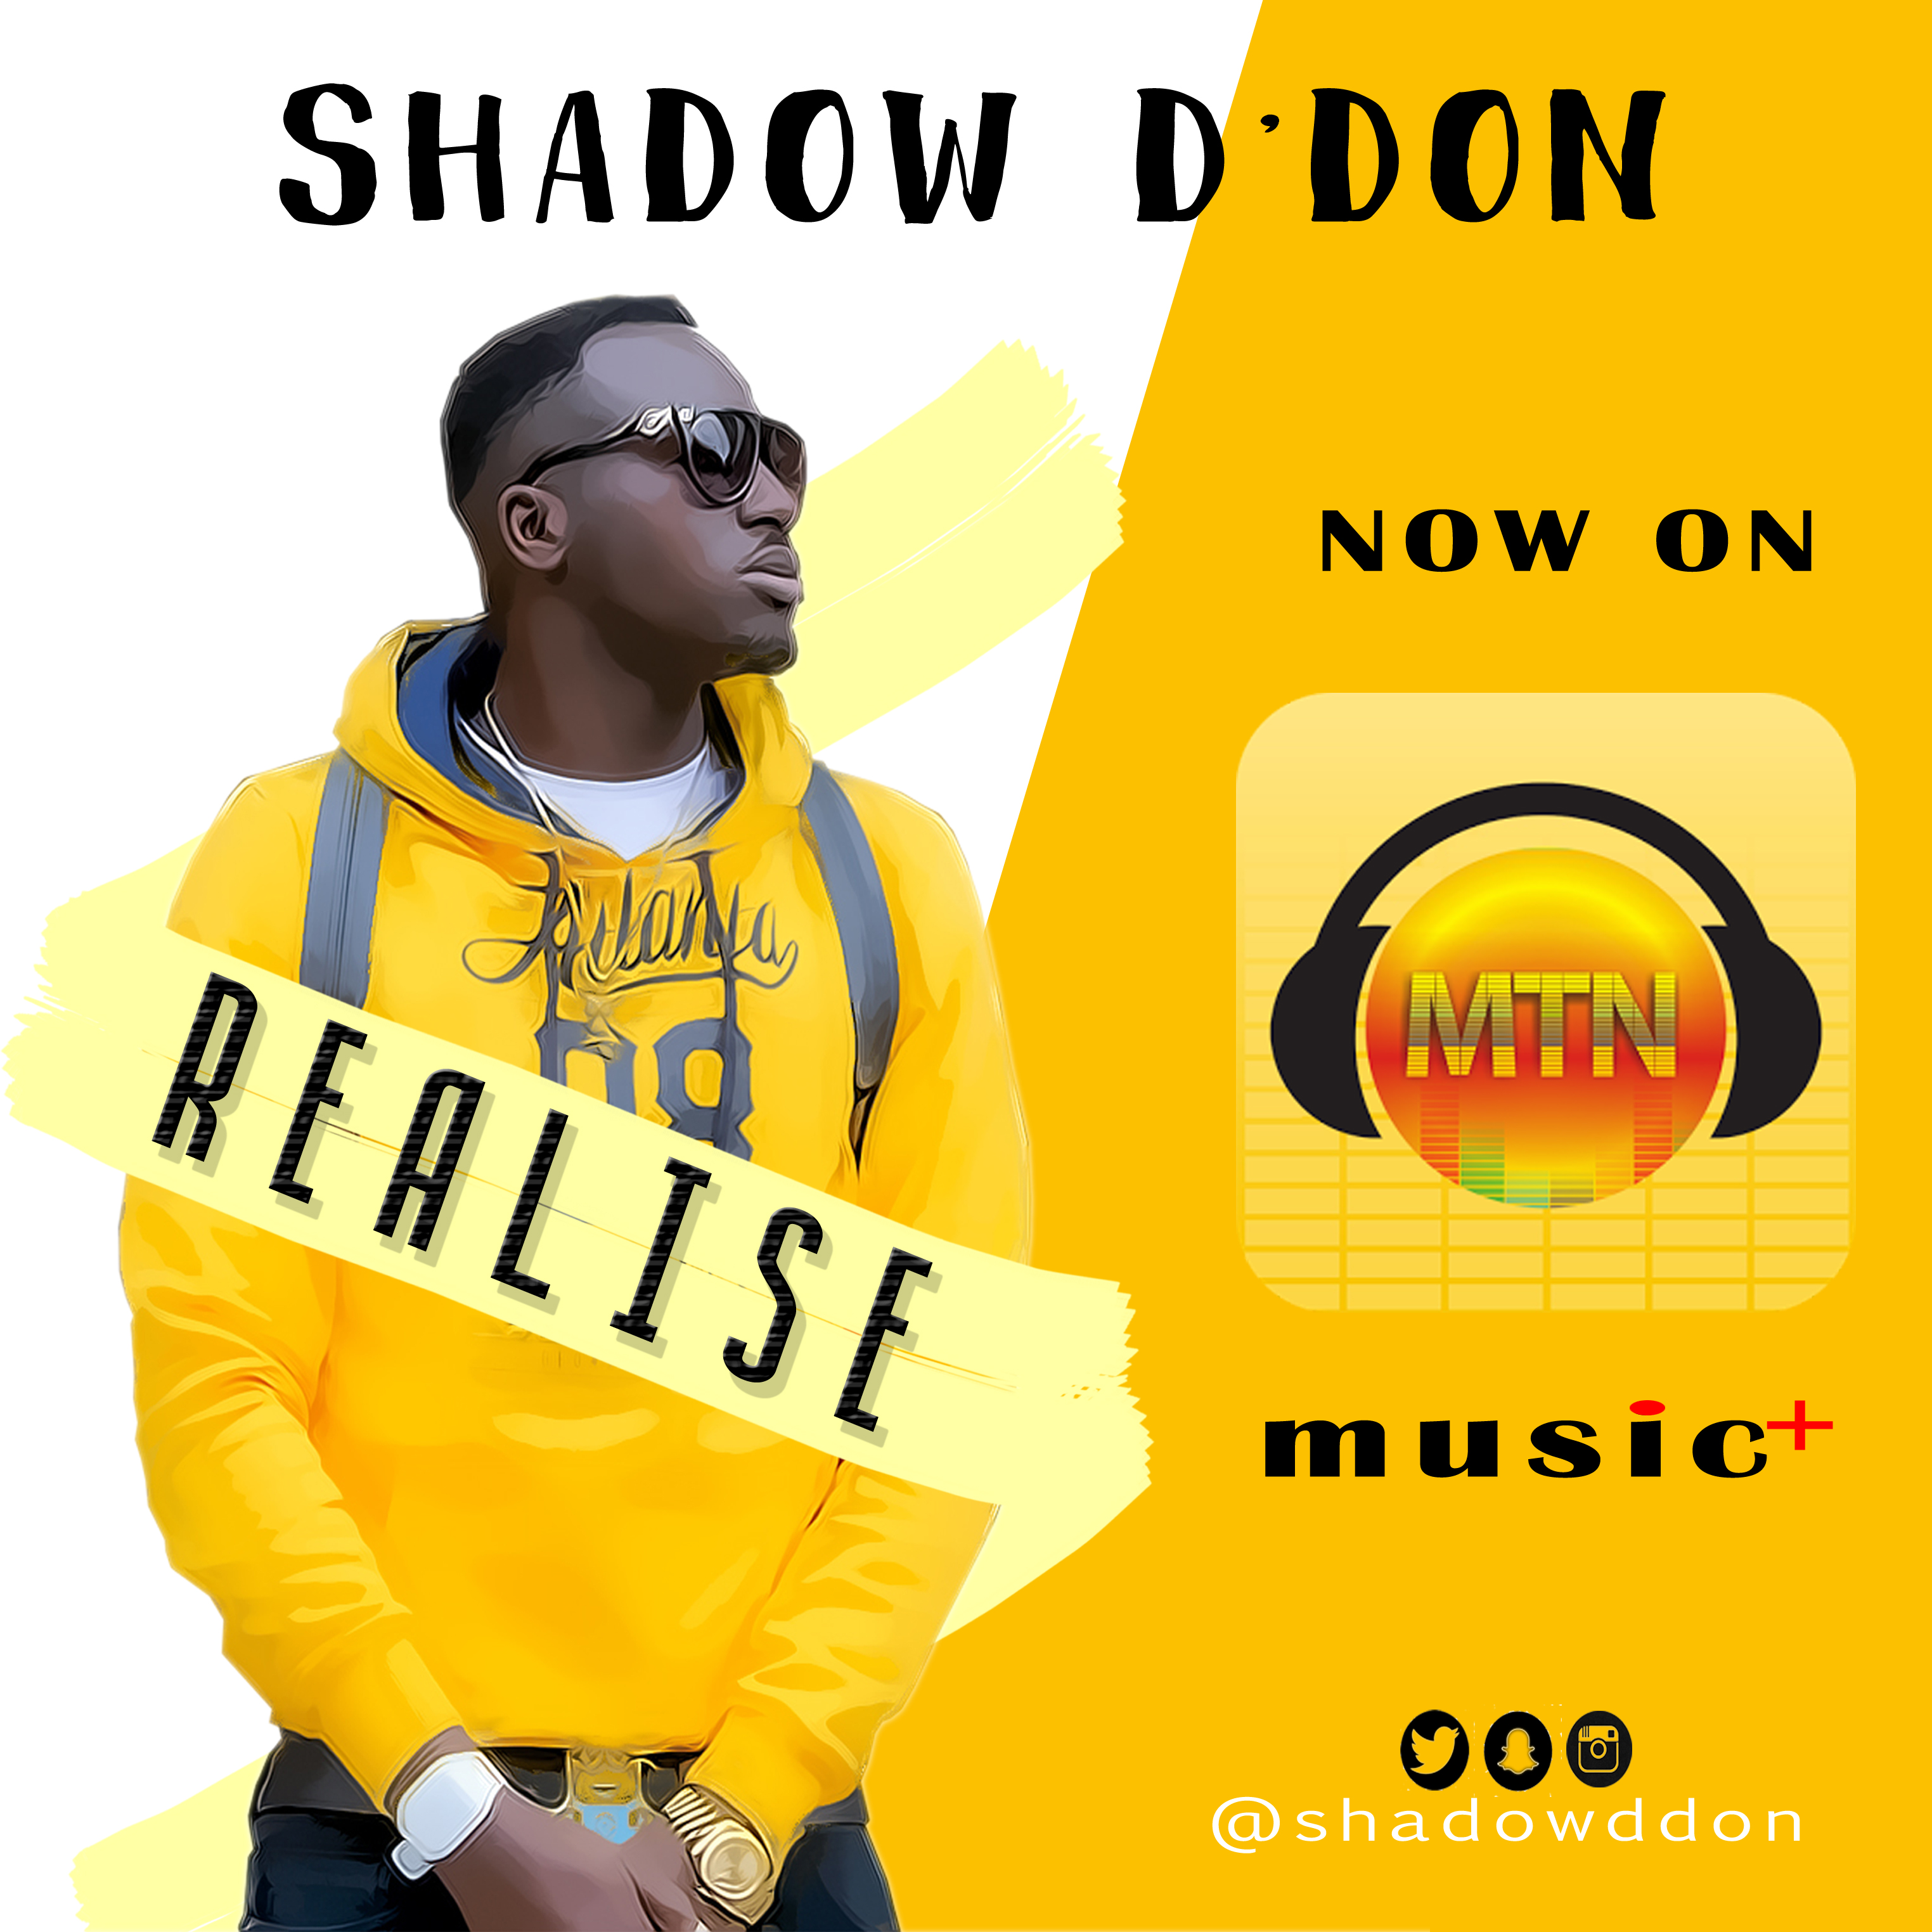 VIDEO: Shadow D'Don - Realise